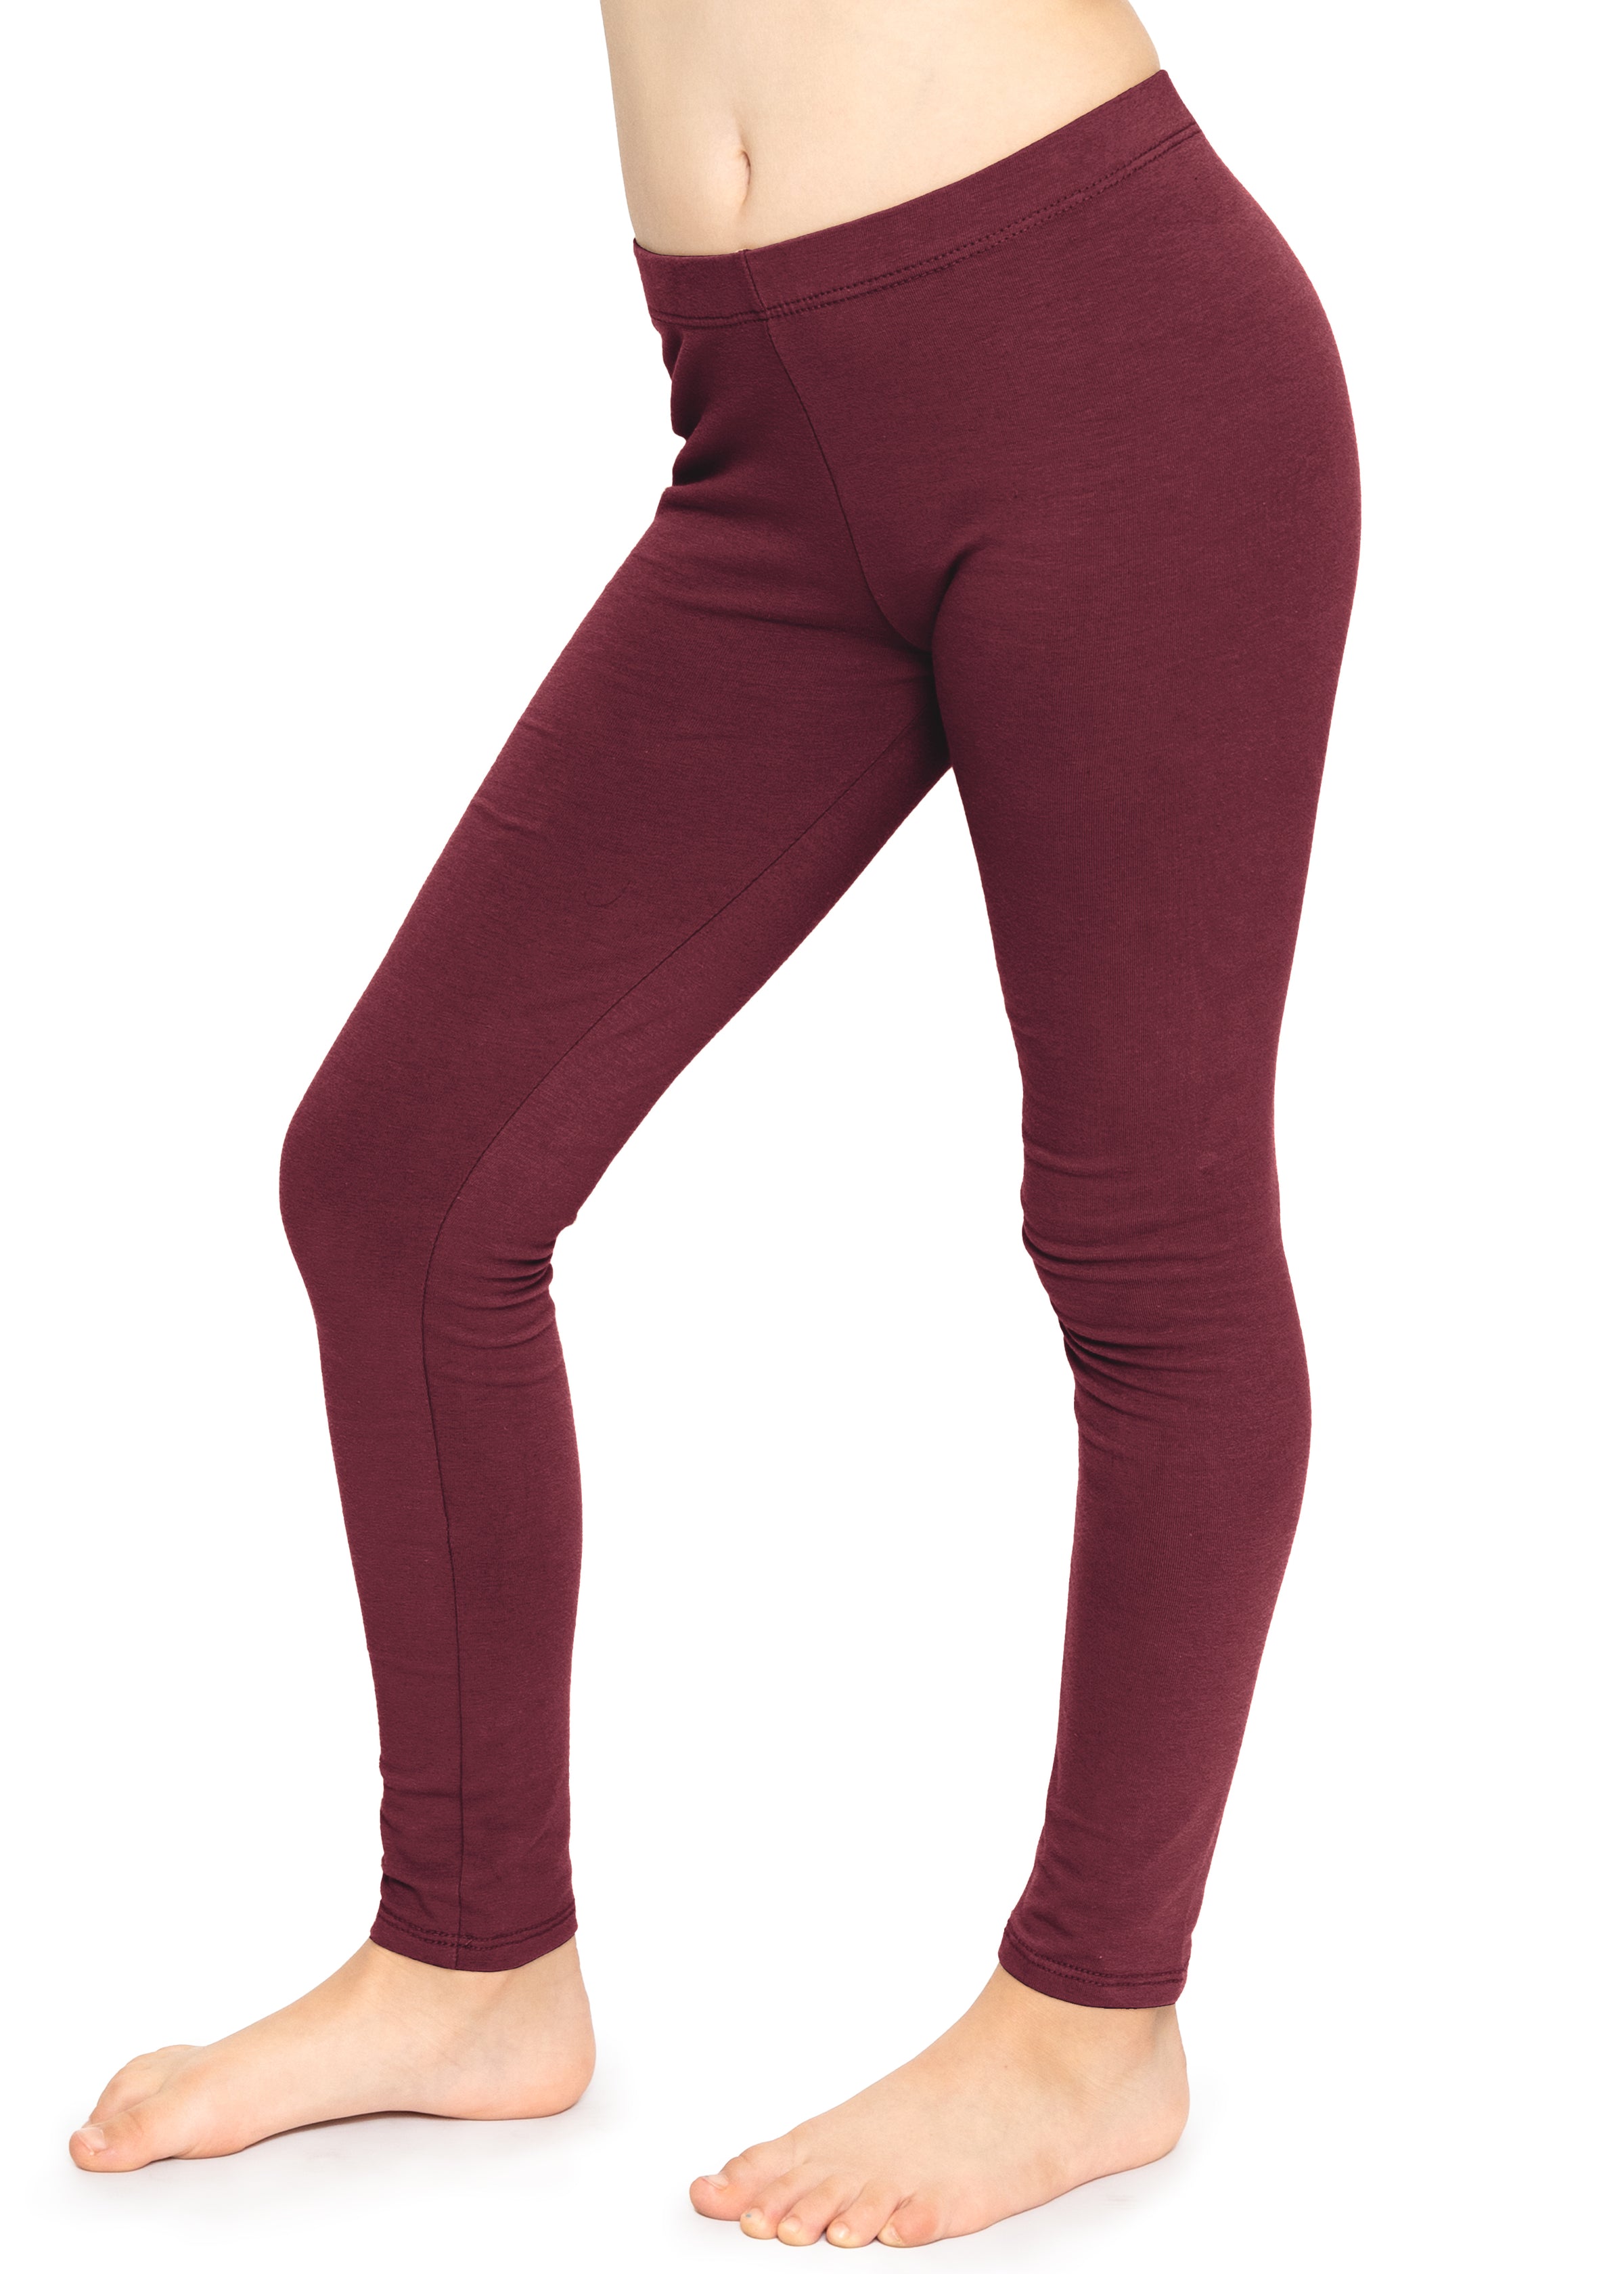 Pixie Women's Cotton Lycra 190 GSM 4 Way Stretchable Churidar Leggings  Combo Pink and Maroon (Pack of 2) - Free Size